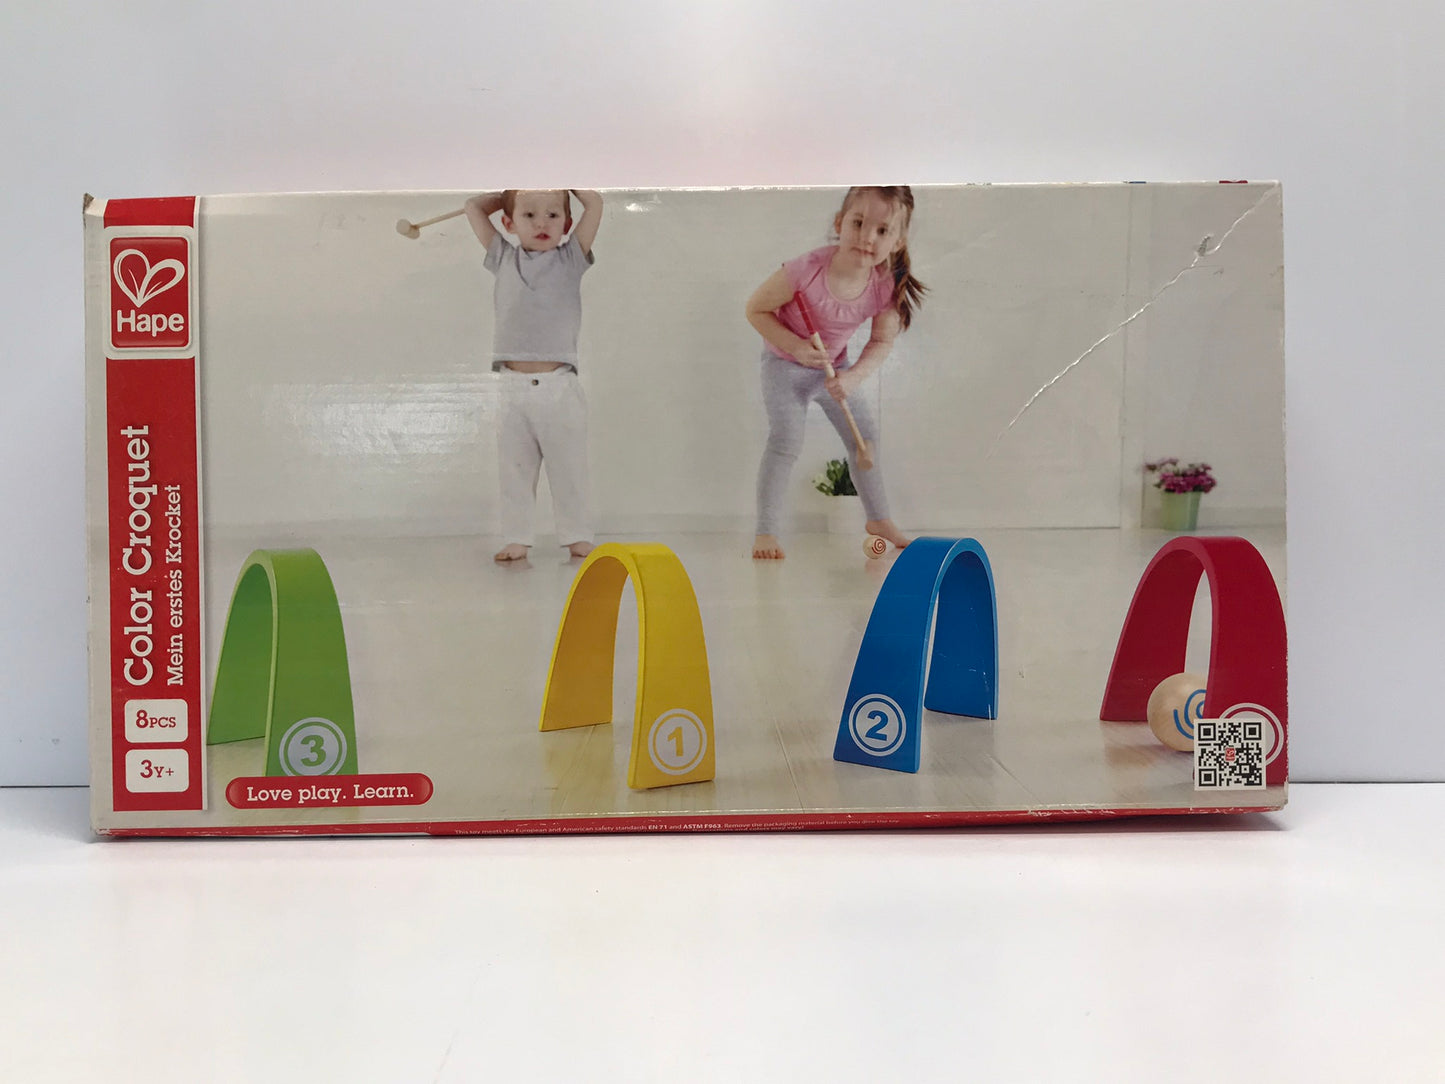 Hape Wooden Kids Outdoor Backyard or Indoor Colorful Croquet Set for 2 Players New In Box